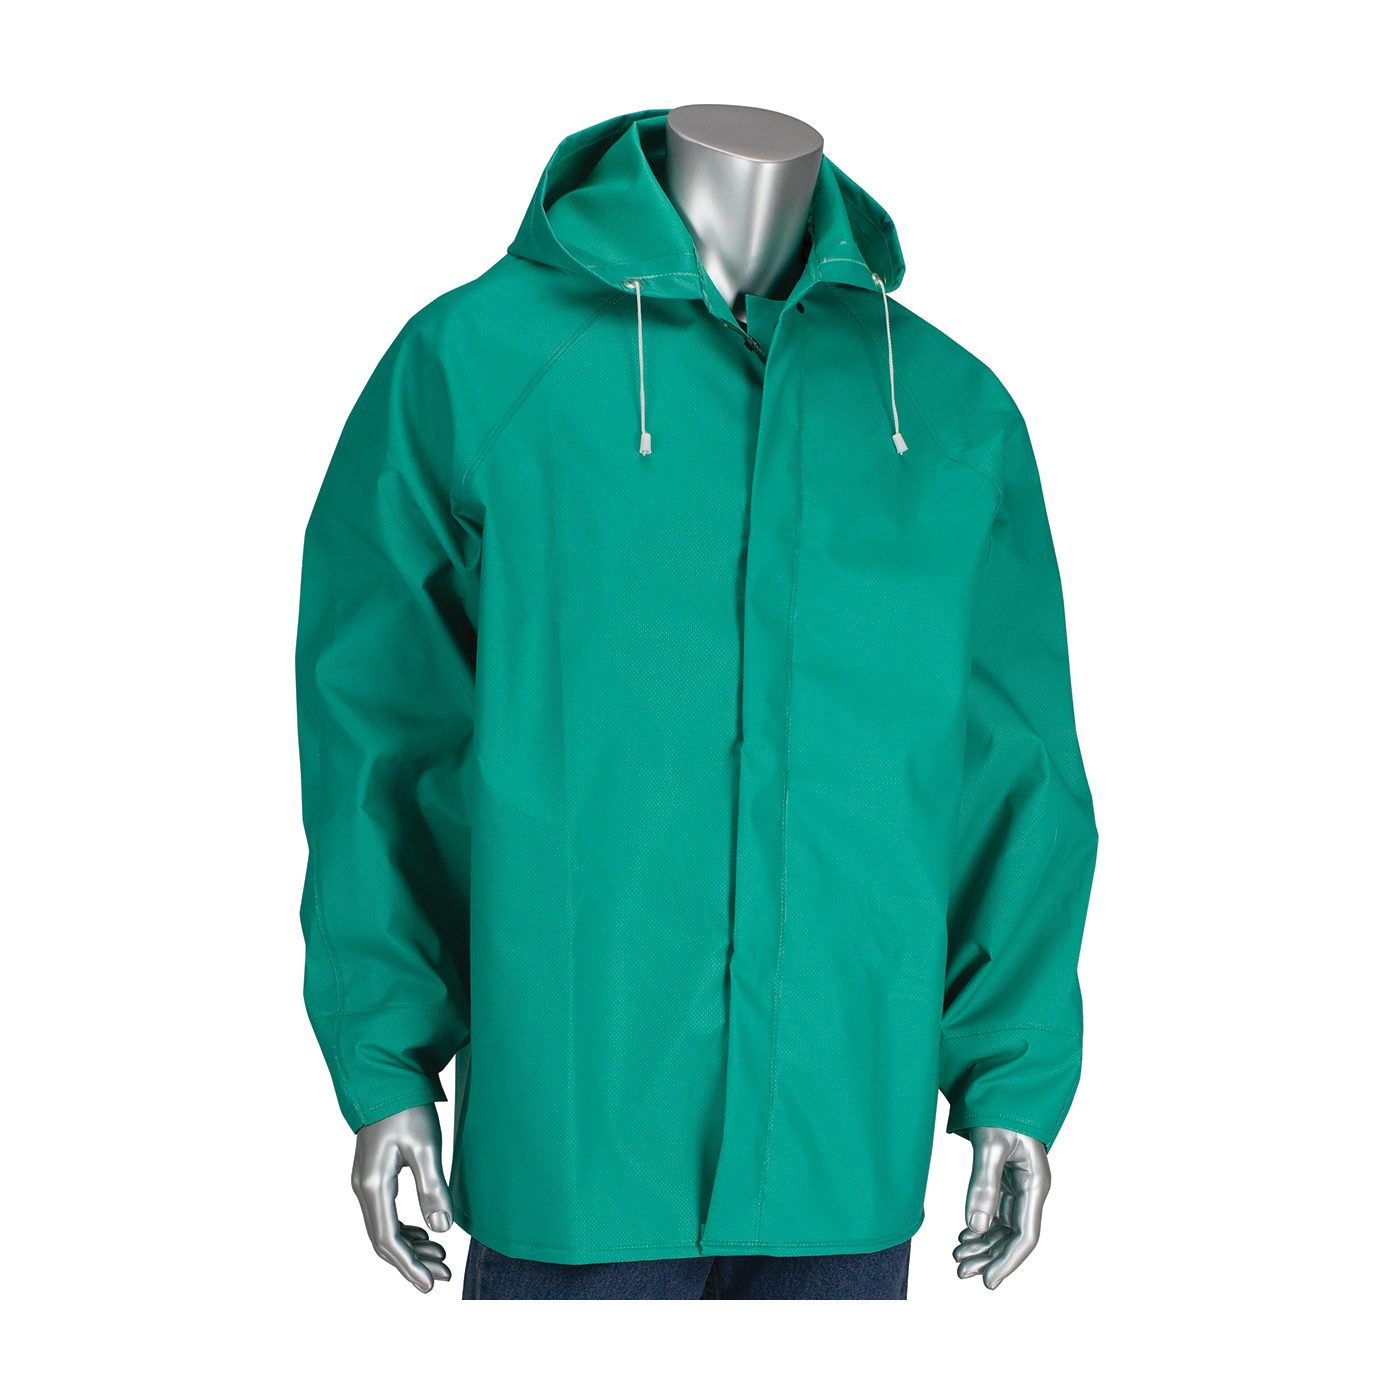 PIP® FALCON™ ChemFR™ 205-420JH/M Rain Jacket With Hood, M, Green, Nylon/PVC, Resists: Flame and Water, ASTM D6413